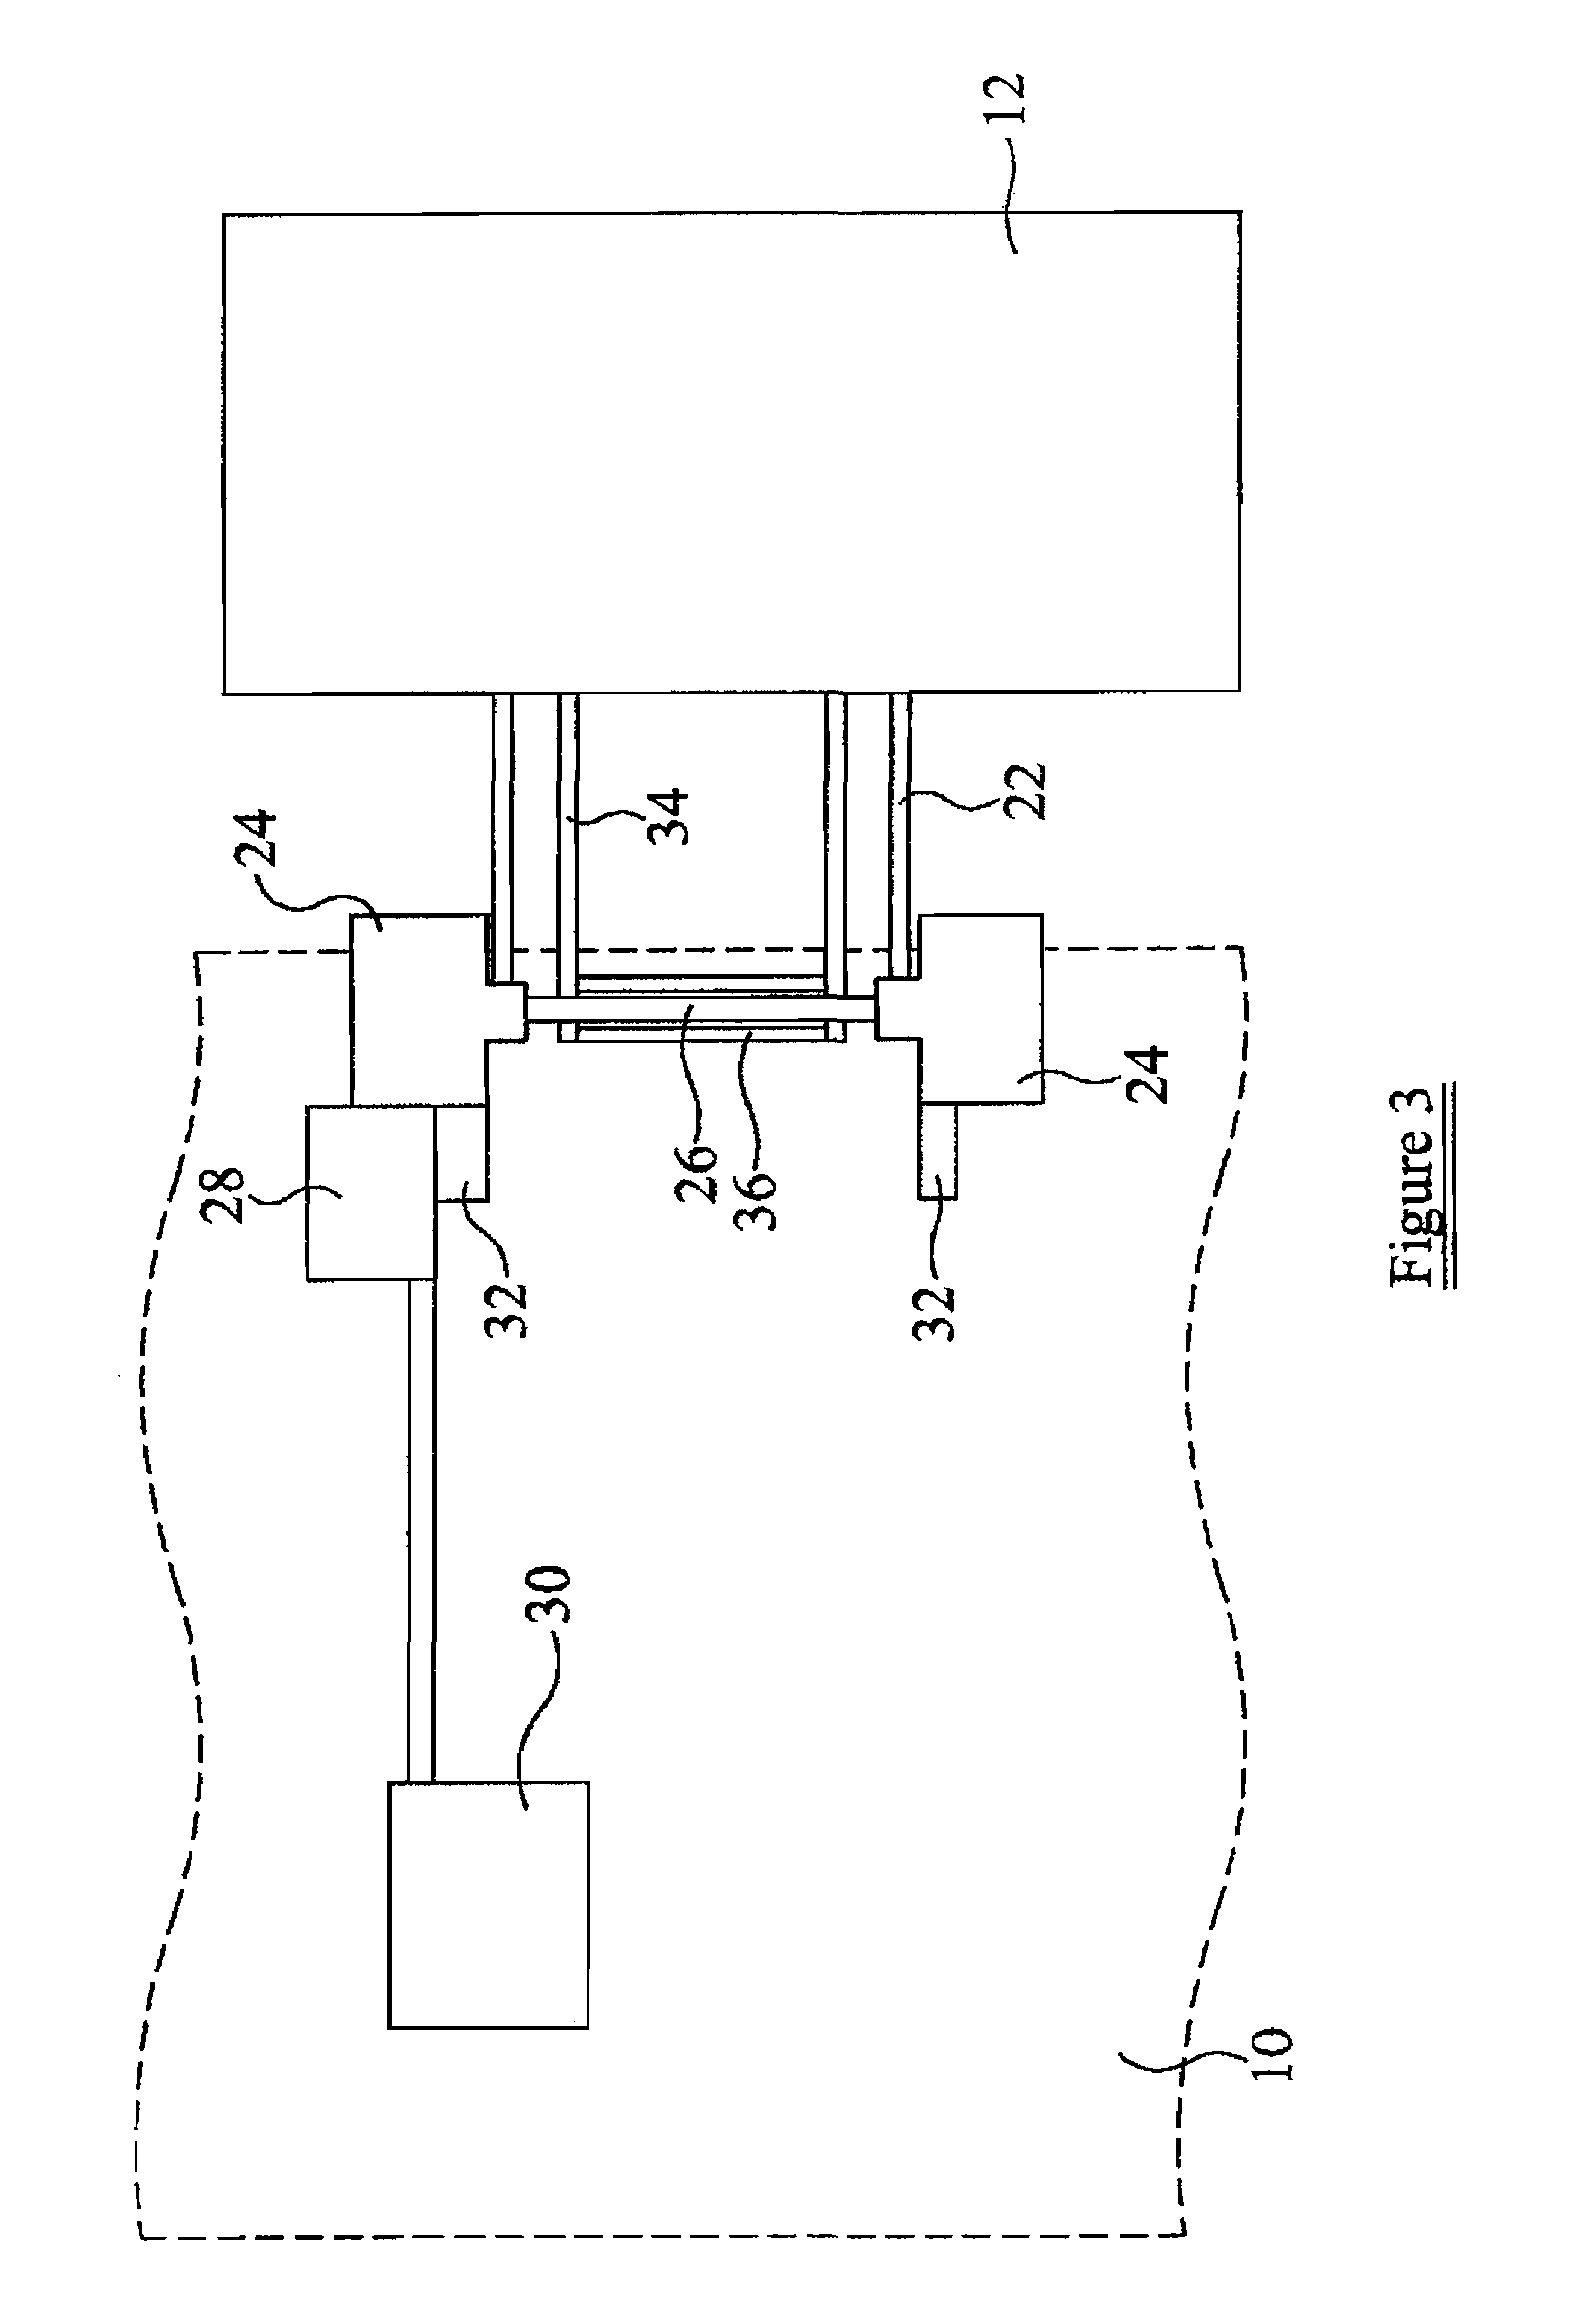 Dual actuator drive assembly with synchronization shaft